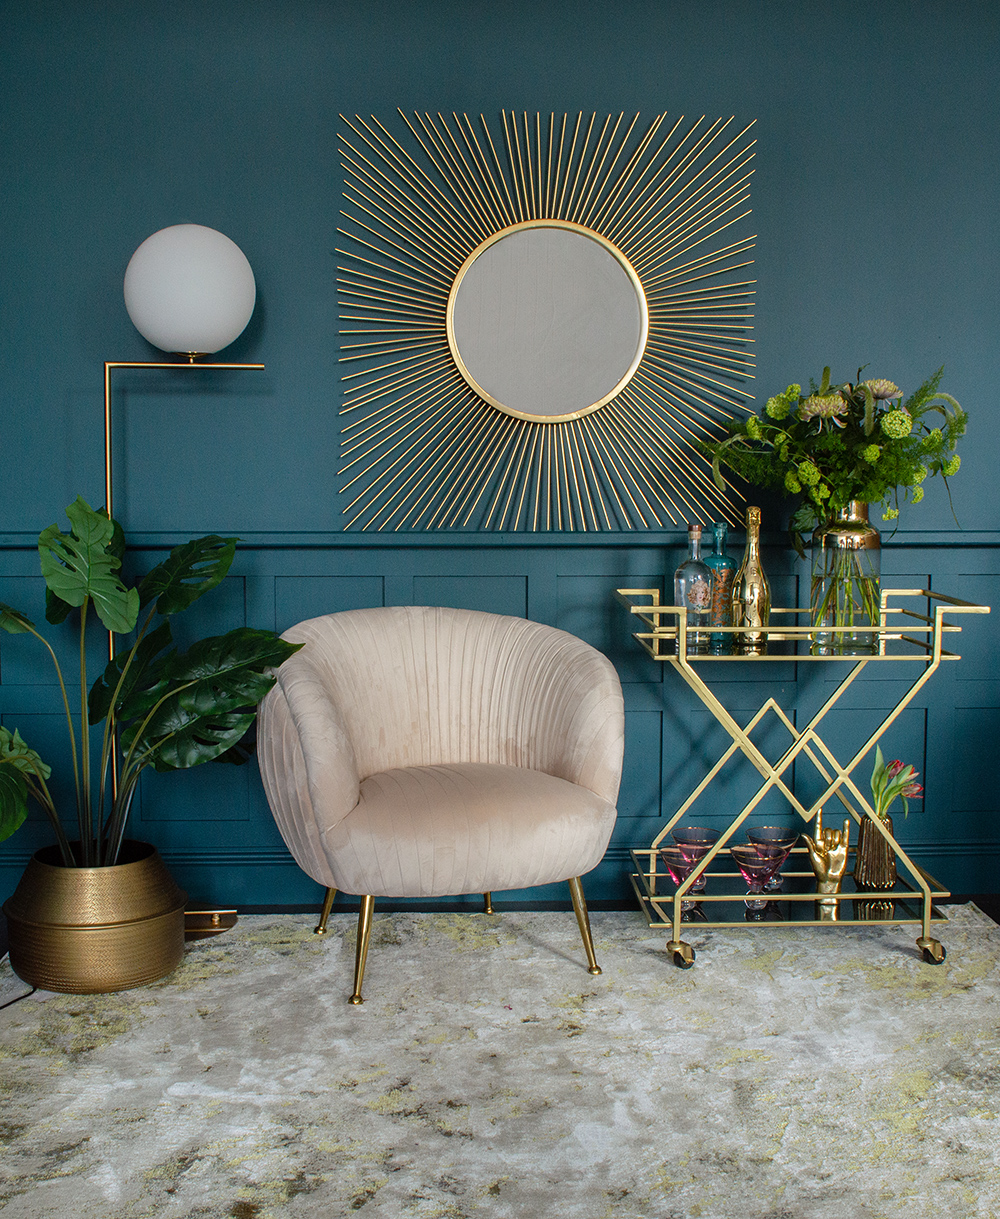 Art deco style interiors, Hollywood glam living room inspiration. Square sunburst mirror with art deco drinks trolley and blush pink velvet armchair